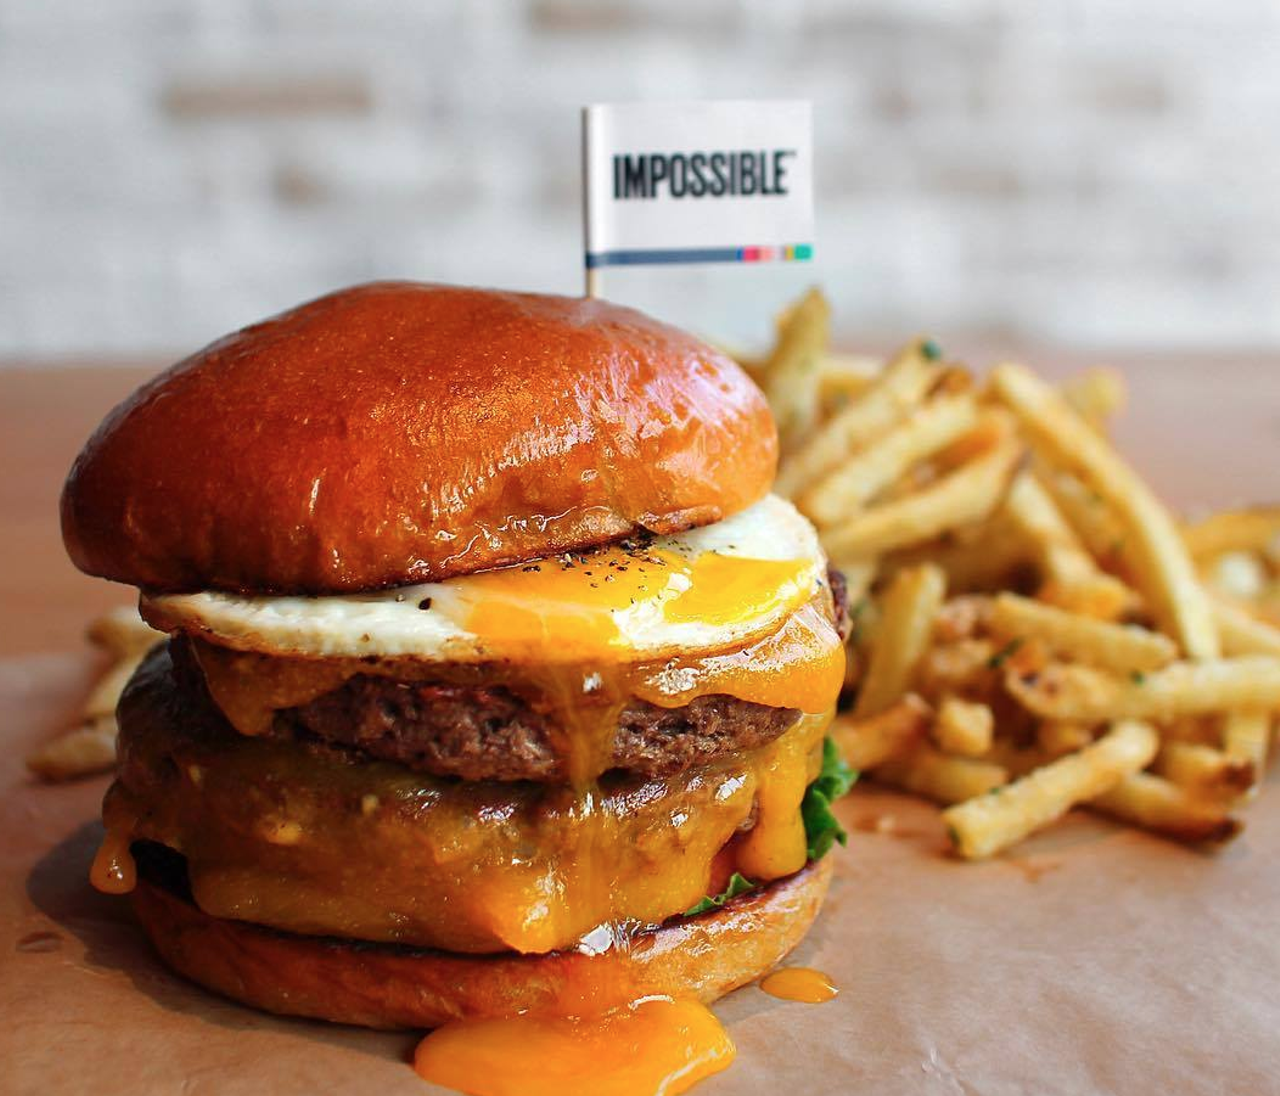 Hopdoddy 
17623 La Cantera Pkwy., Suite 101, (210) 434-2337, hopdoddy.com
The Impossible Burger is impossibly flavorful. All the real taste of a burger, but all veggies! So the next time your squad wants to head out to Hopdoddy, just now that you have a sinfully delectable meal waiting for you.
Photo via Facebook, Hopdoddy Burger Bar